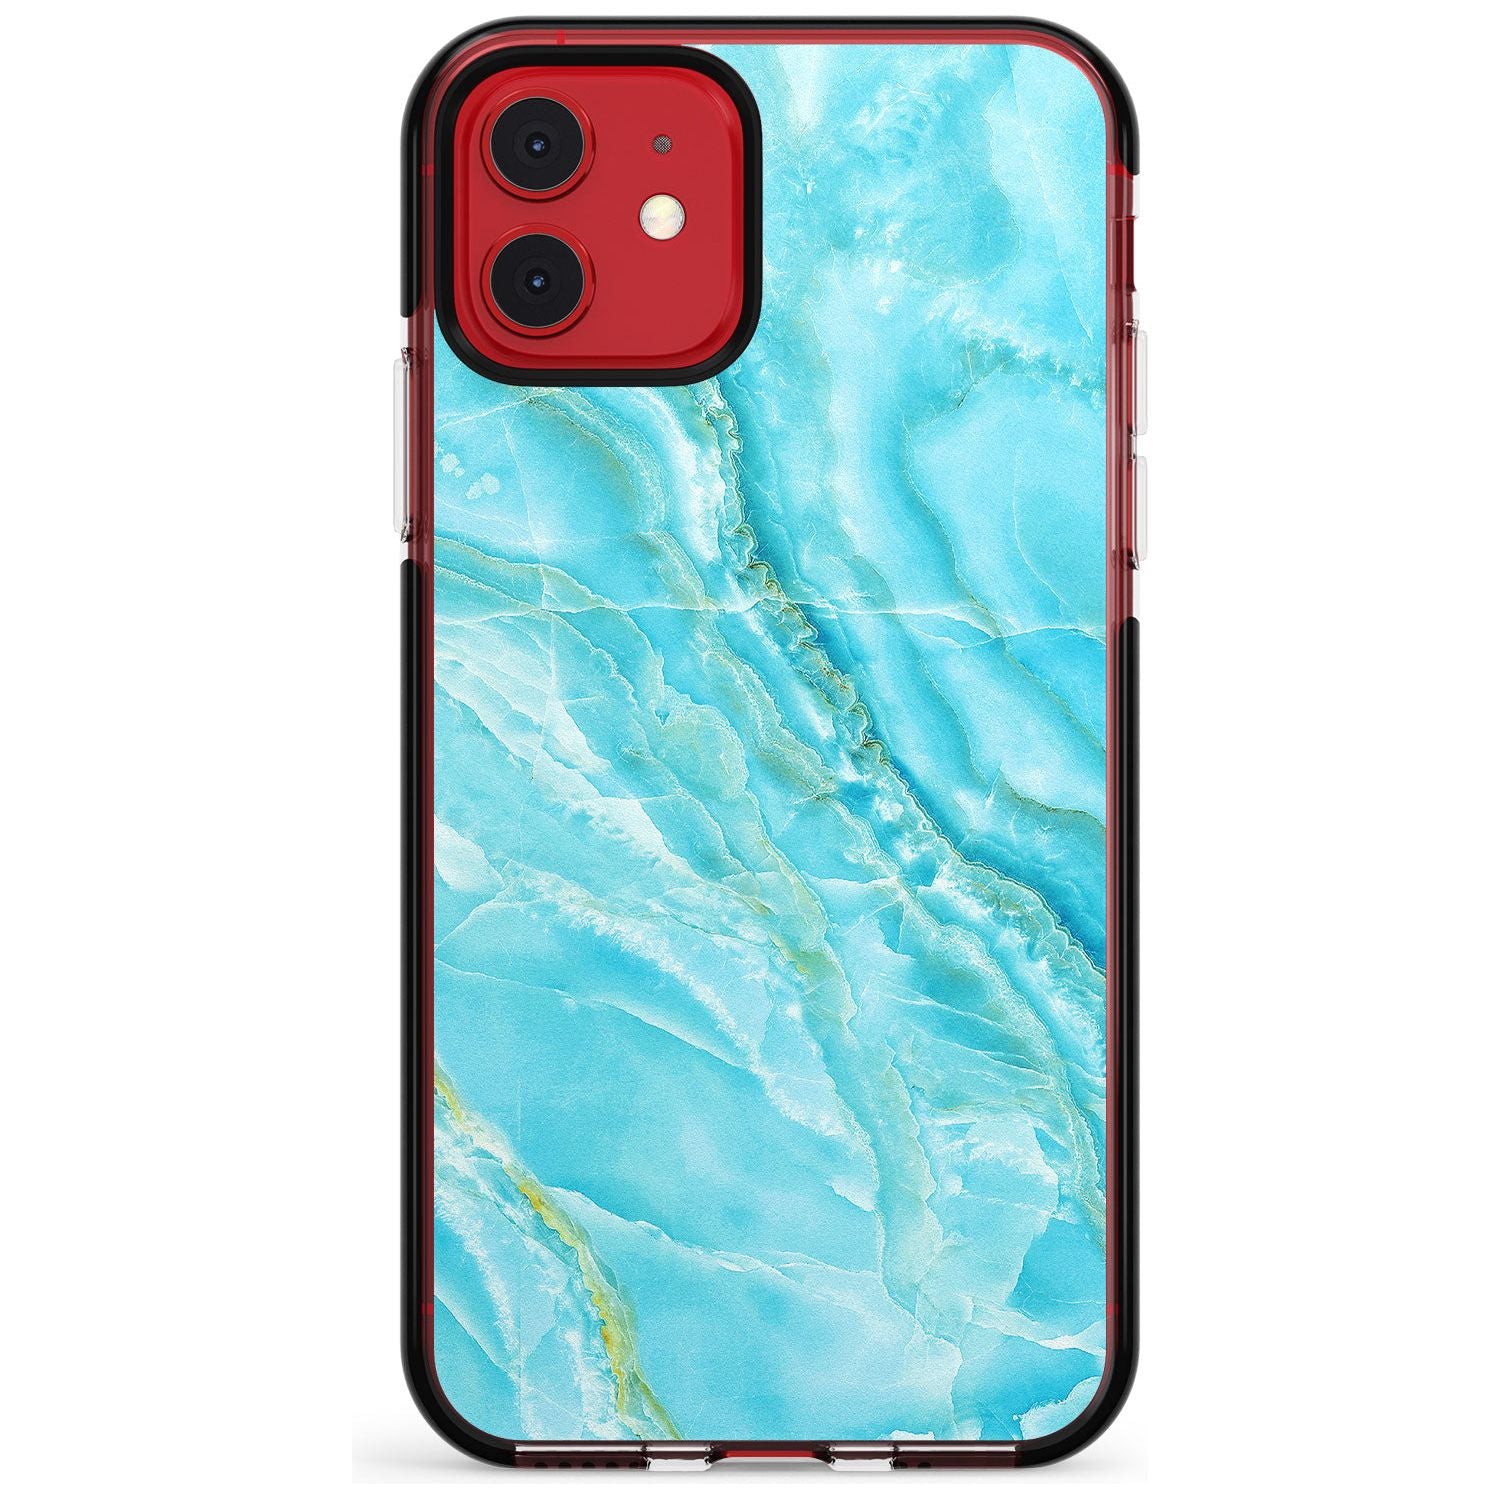 Bright Blue Onyx Marble Texture Pink Fade Impact Phone Case for iPhone 11 Pro Max